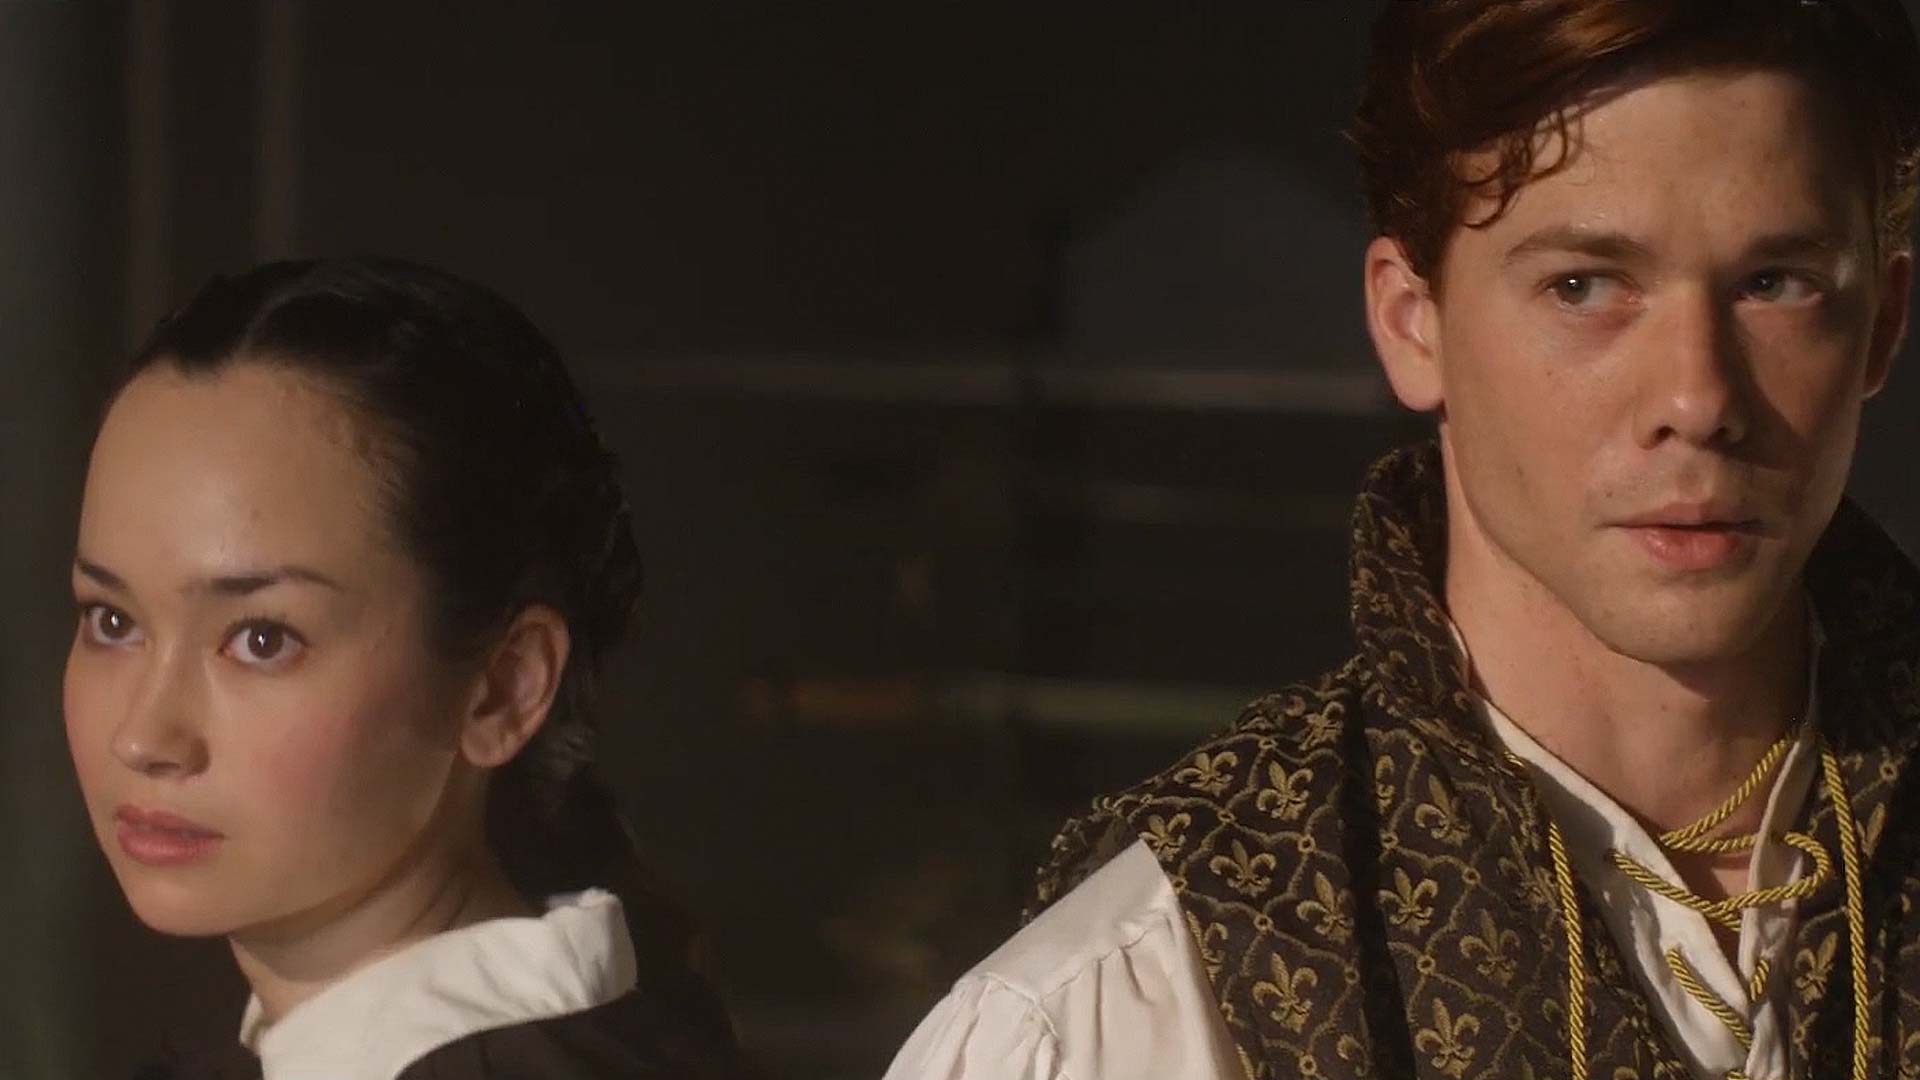 A production still from ENGENDERED TV Series showing a man and a woman in period costume